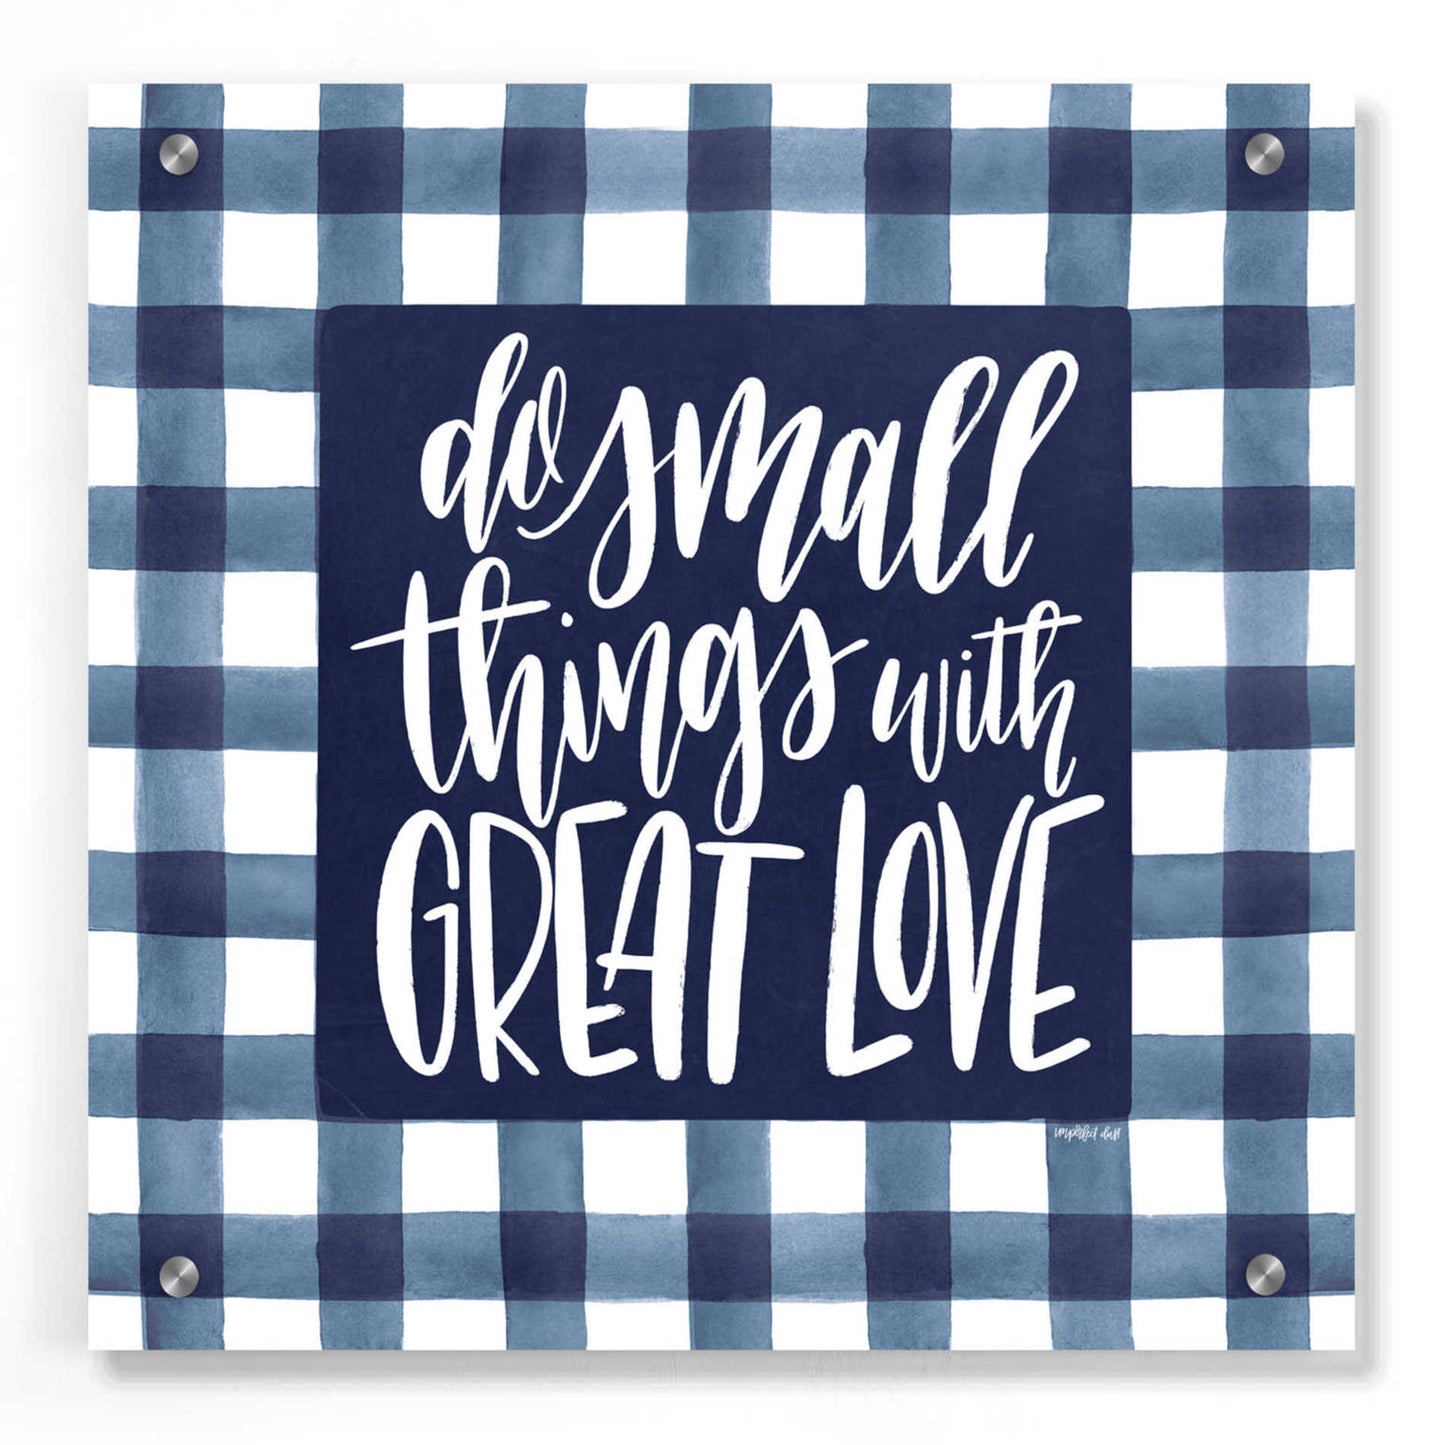 Epic Art 'Do Small Things with Great Love' by Imperfect Dust, Acrylic Glass Wall Art,36x36